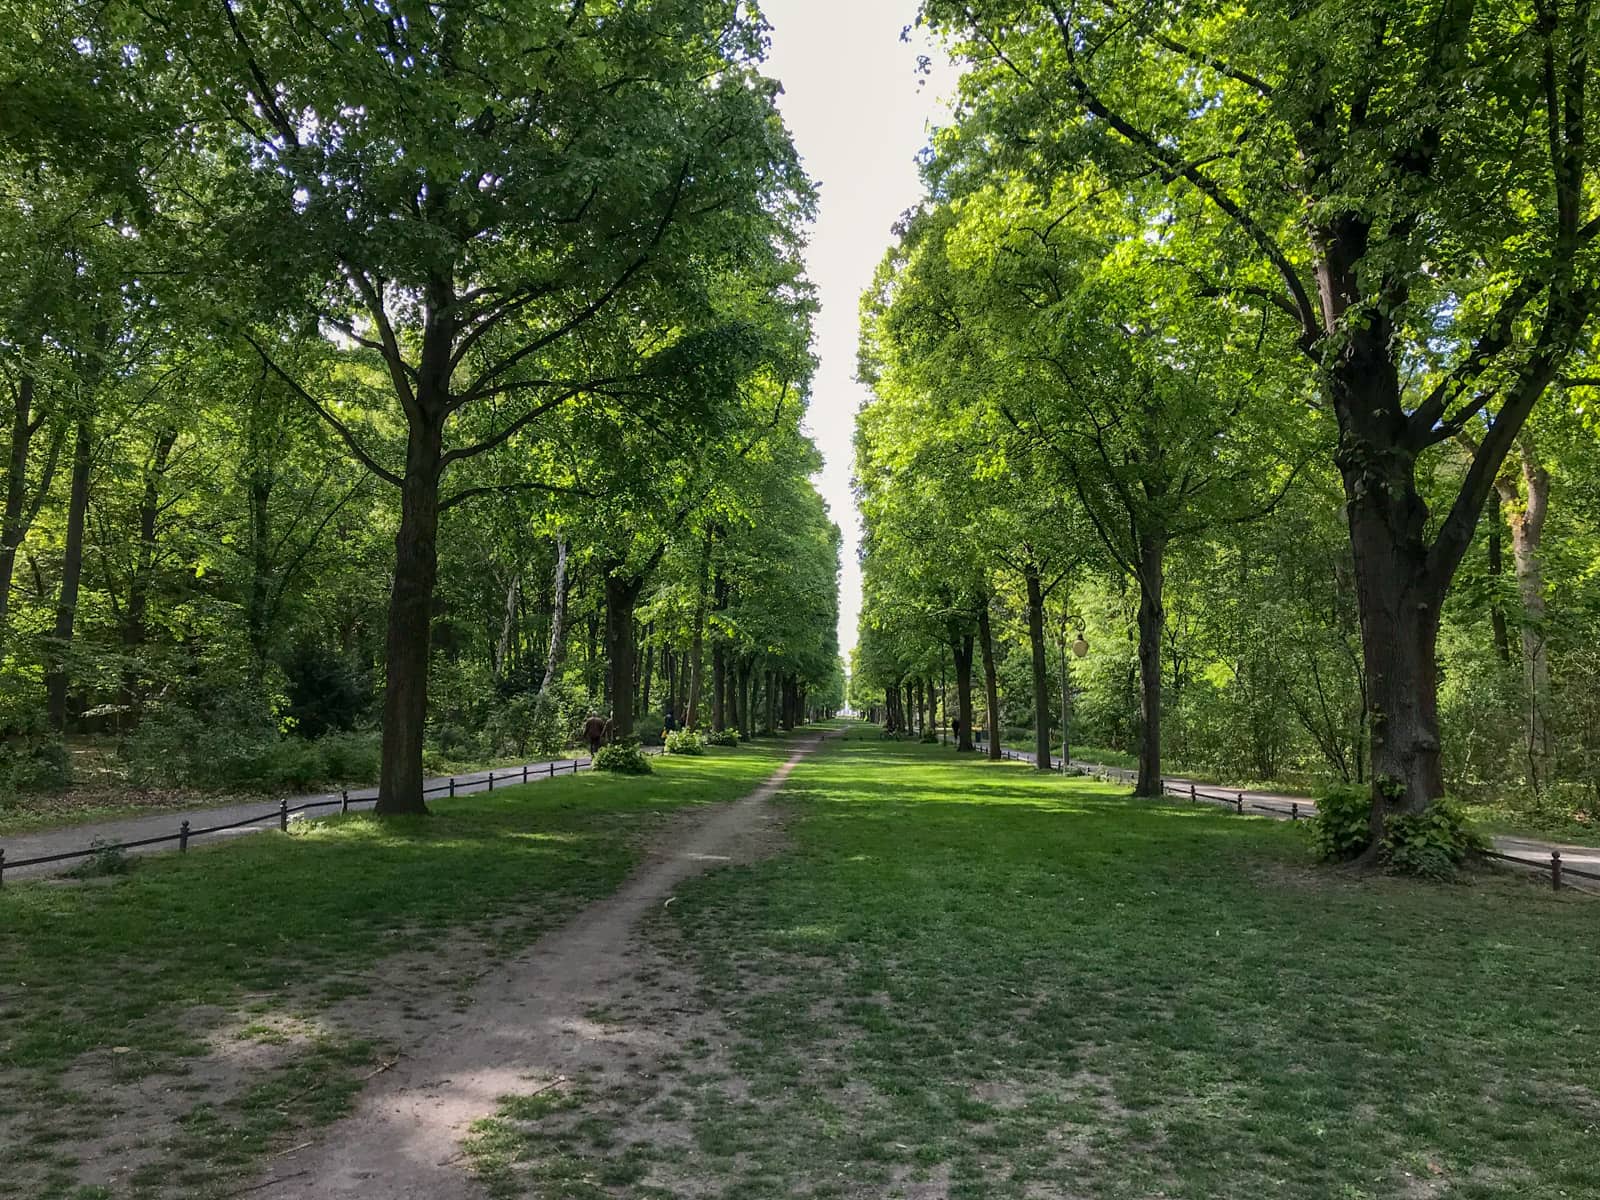 The inside of a park, looking like a forest, with a dirt path leading into the distance